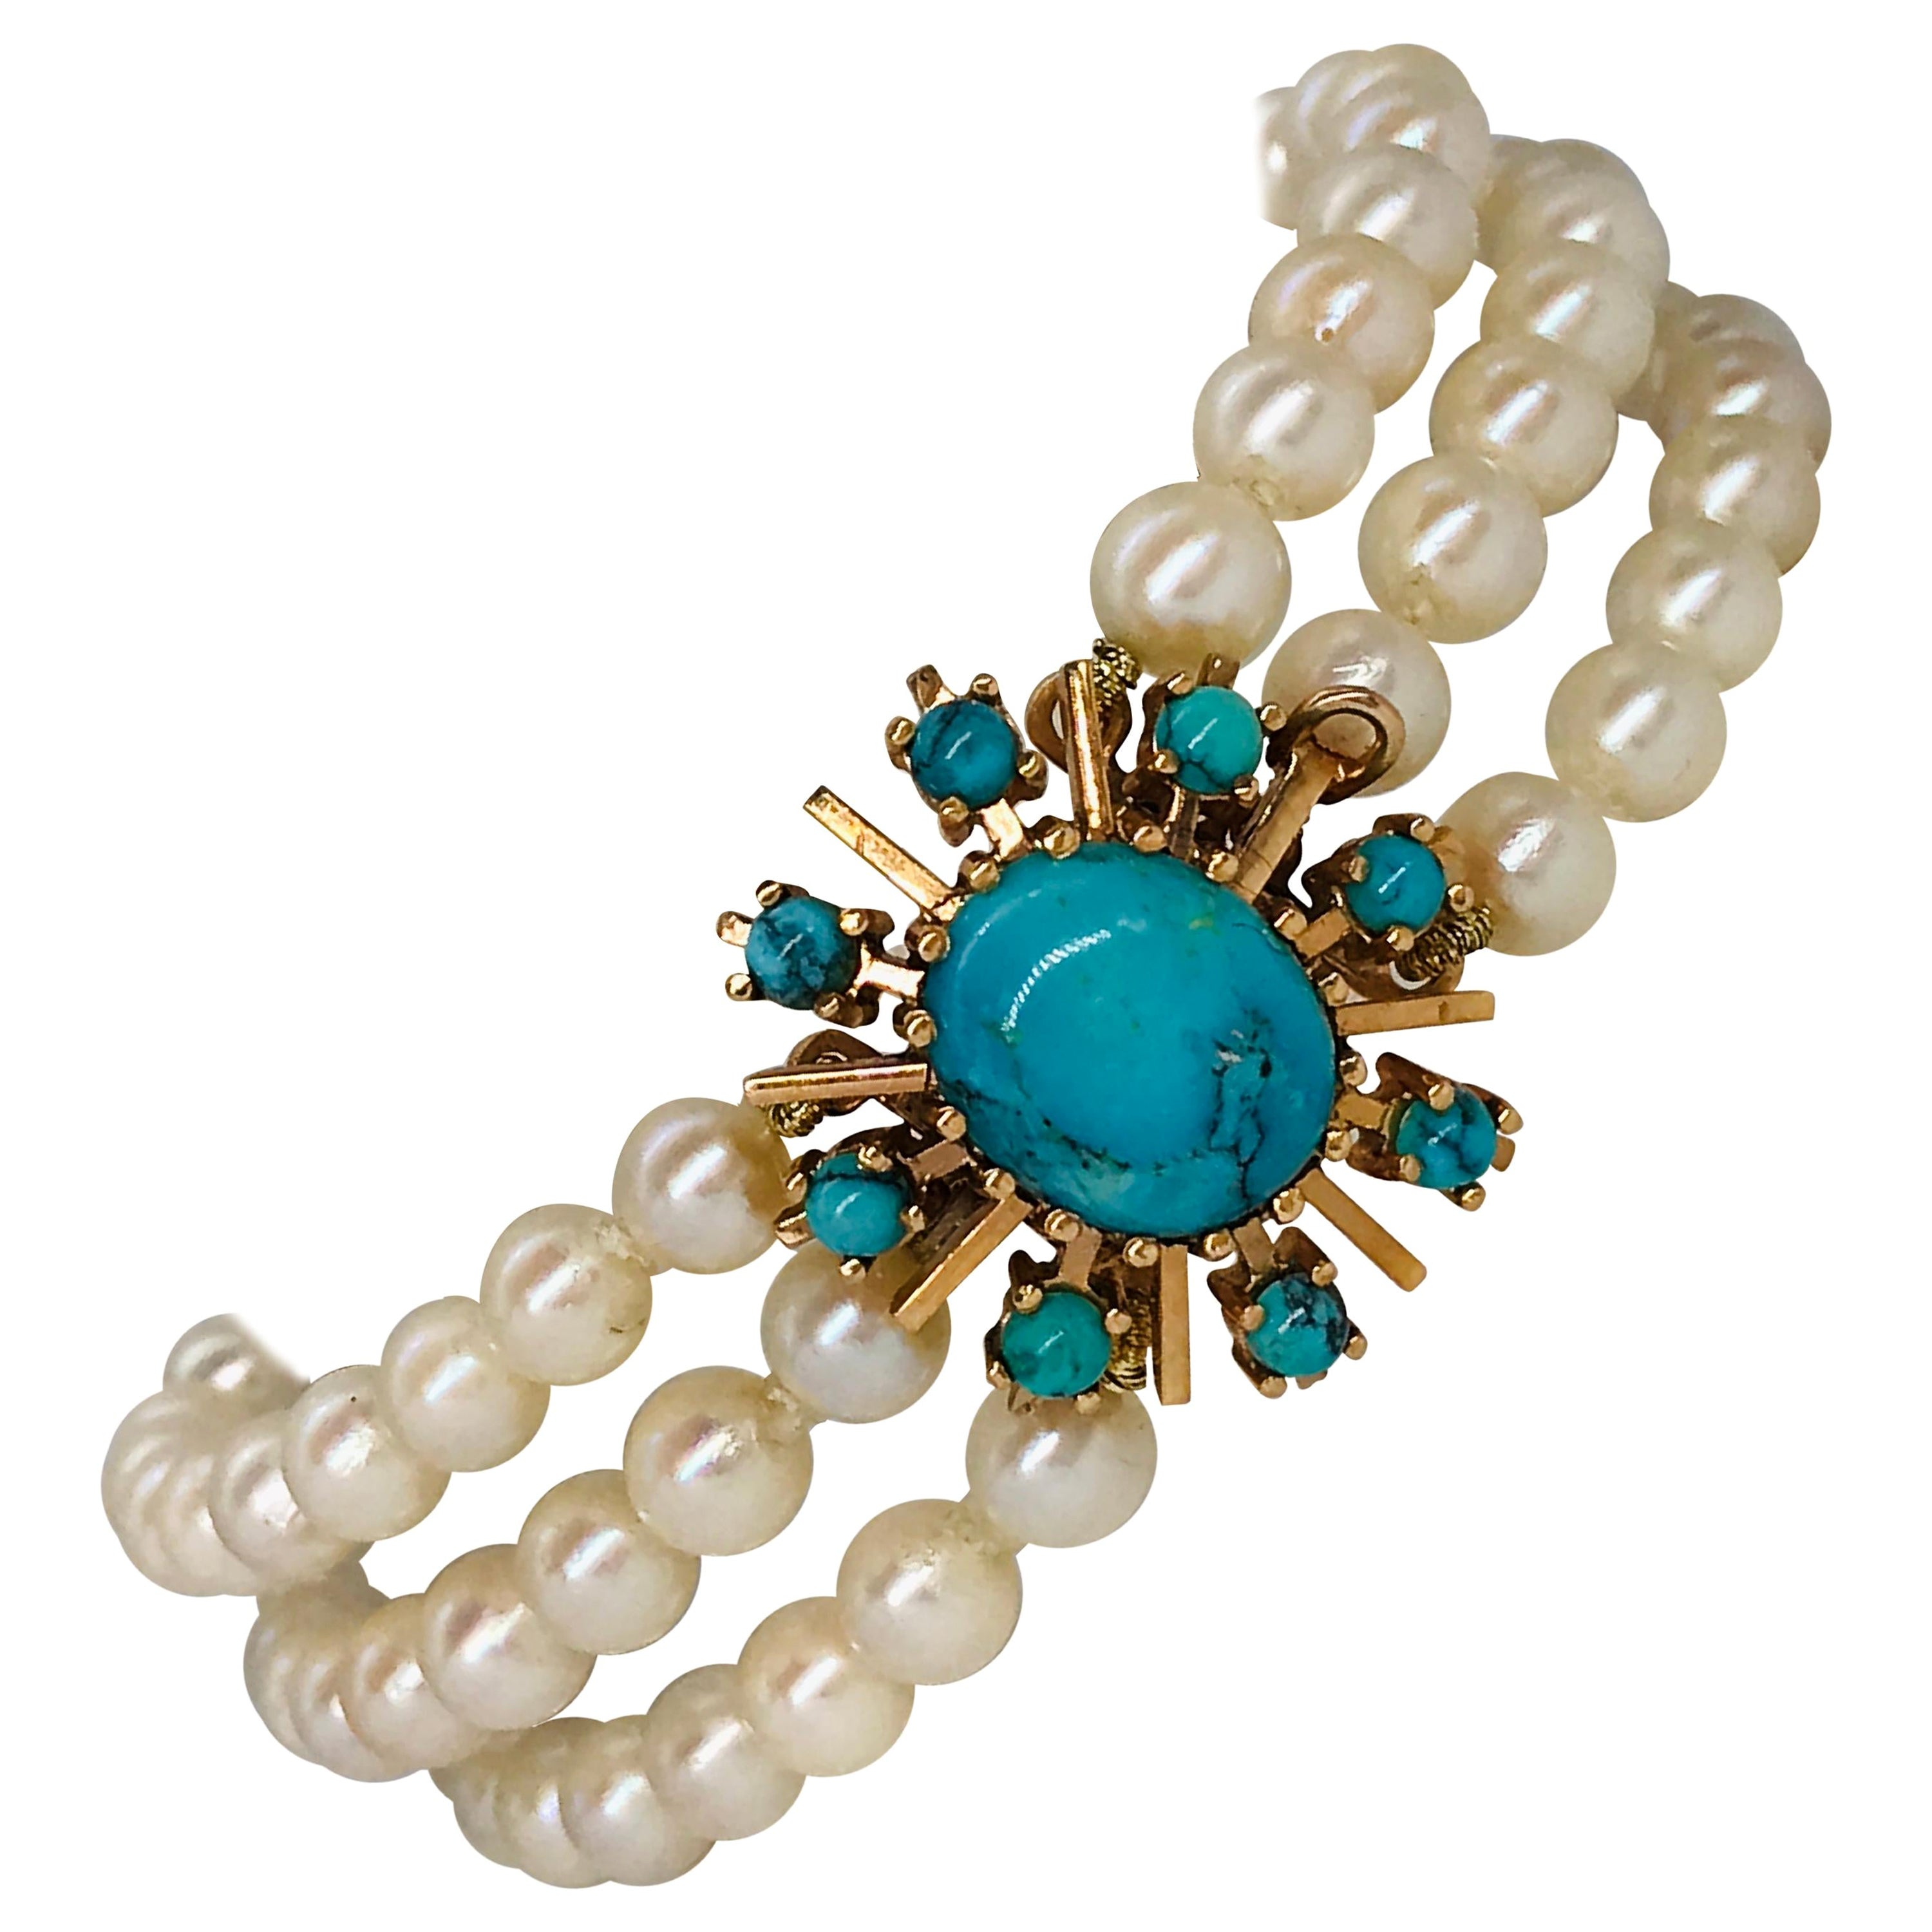 Akoya Pearl Bracelet with Turquoise and Yellow Gold 18 Karat